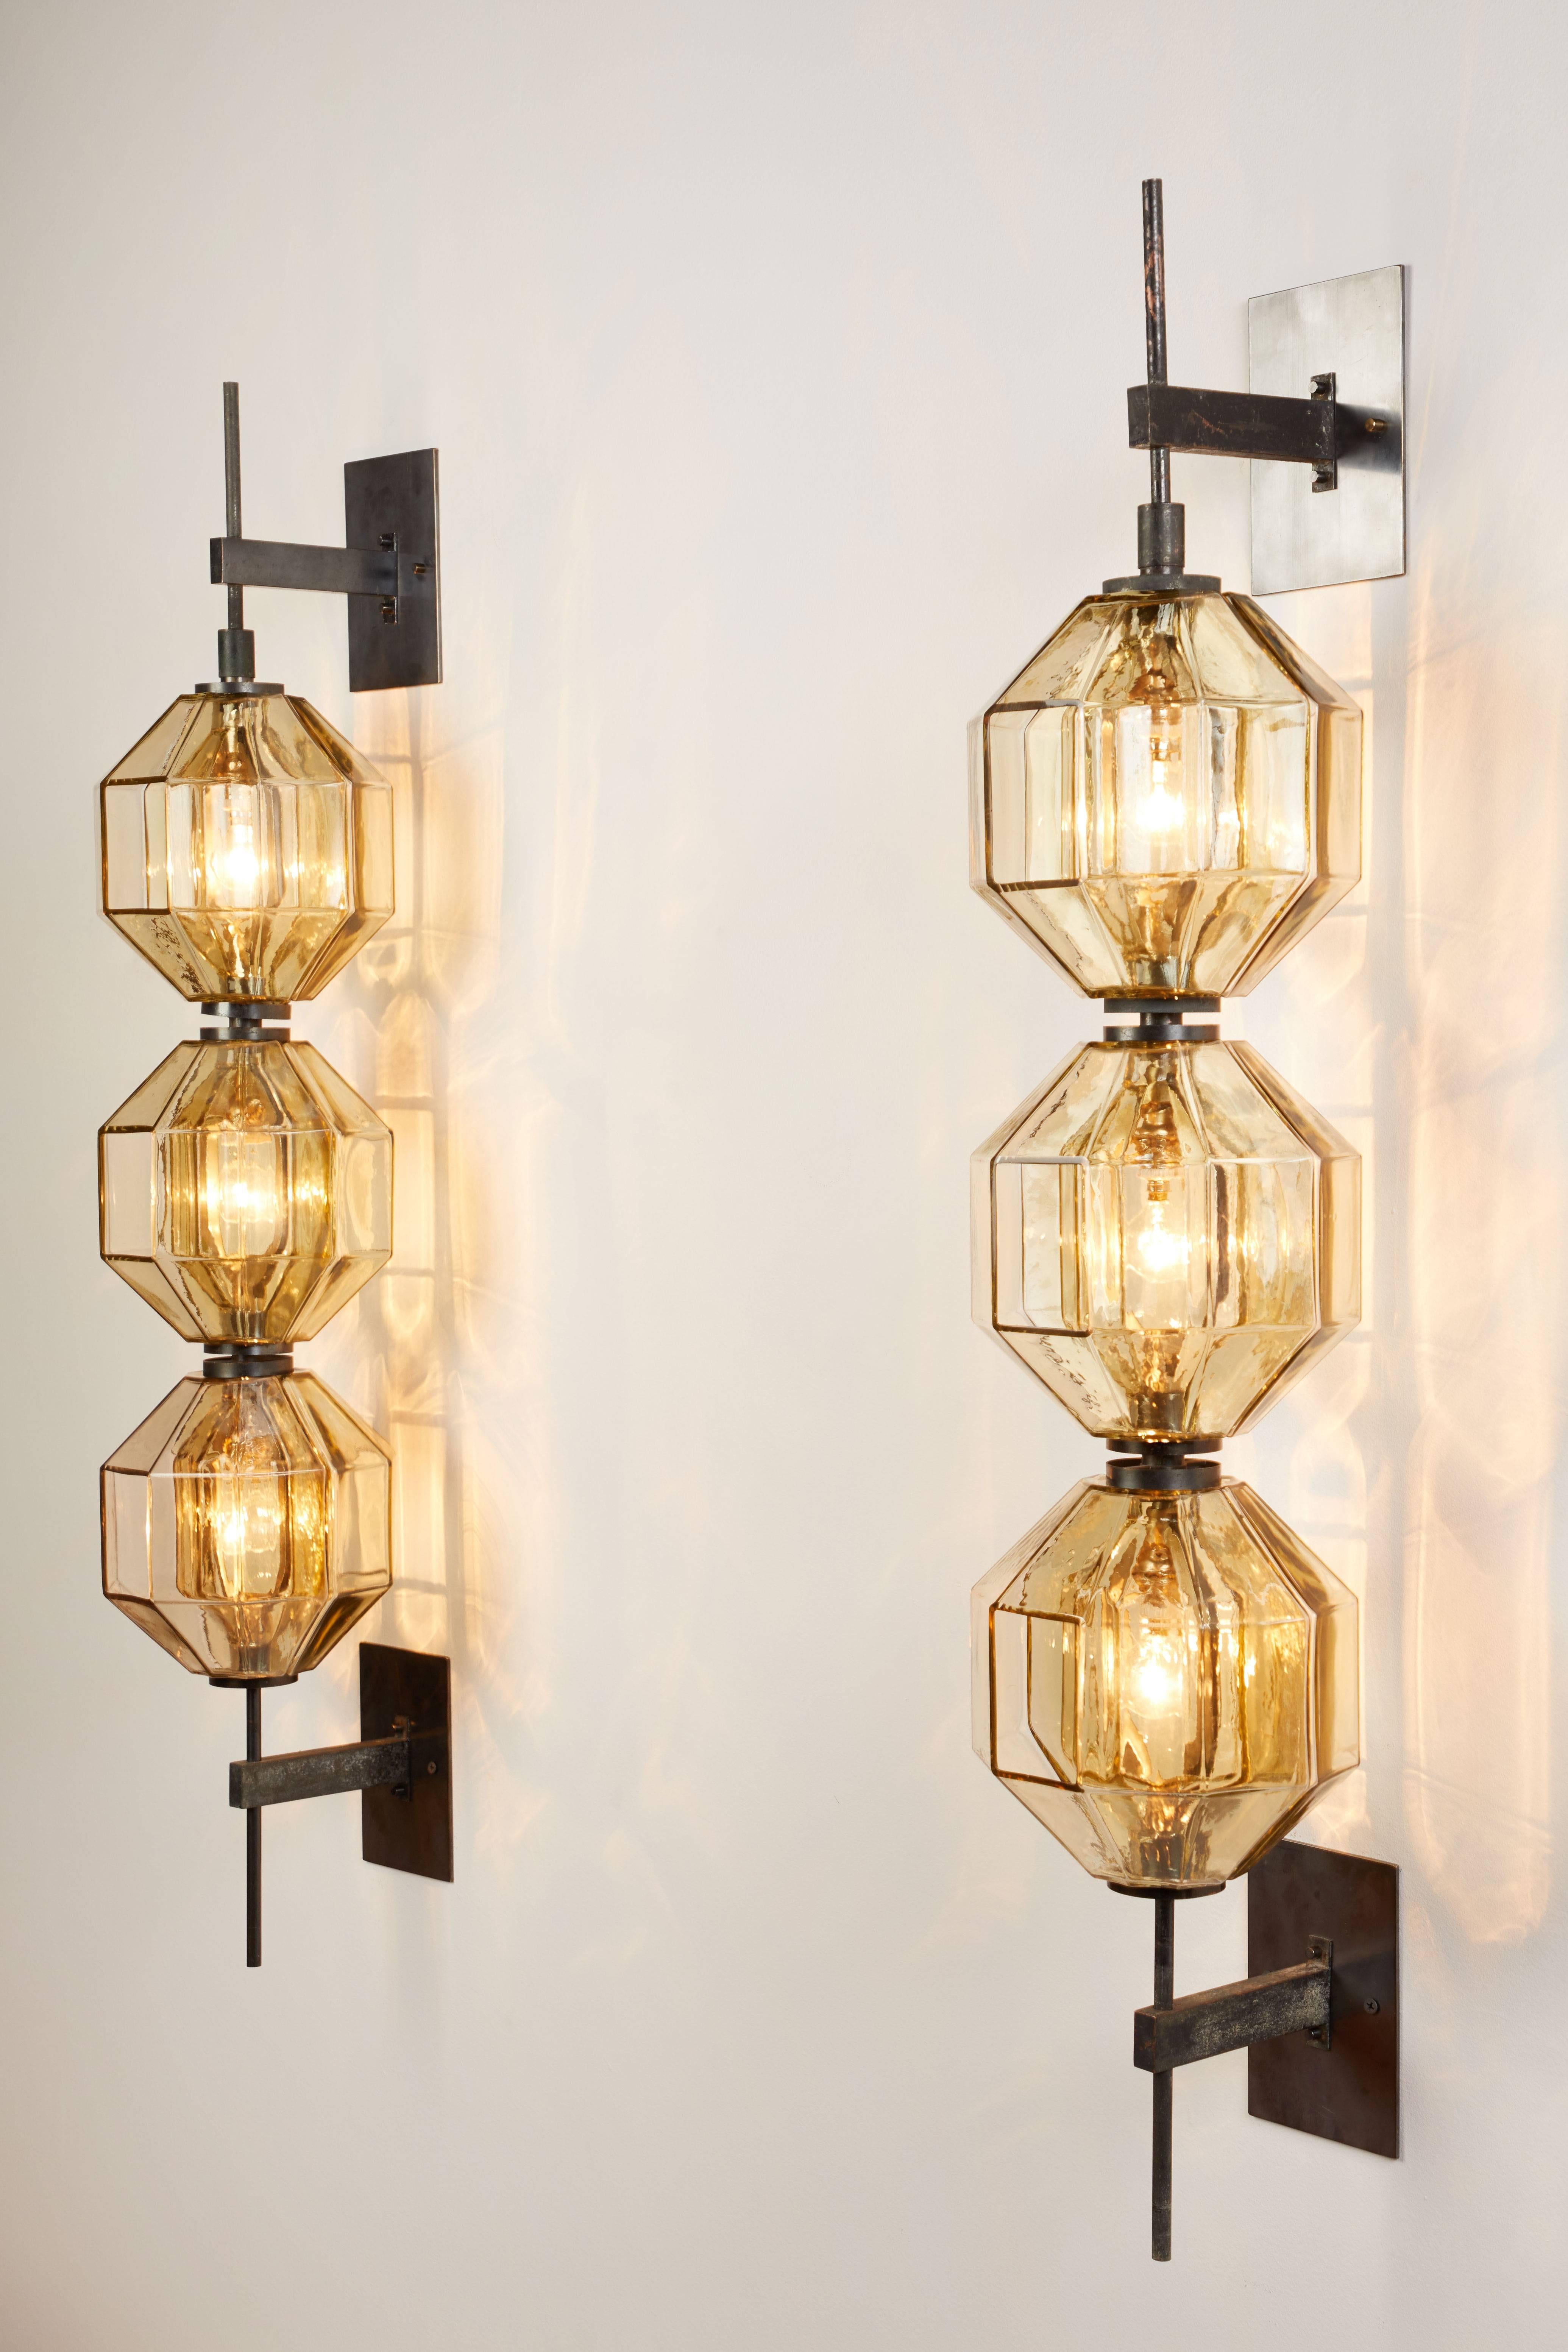 Pair of rare and important wall lights, designed by Vistosi in Italy, circa 1960s. Molded glass with patinated brass hardware. Custom backplates. Rewired for US junction boxes. Each light takes four E14 European candelabra bulbs. Retains original